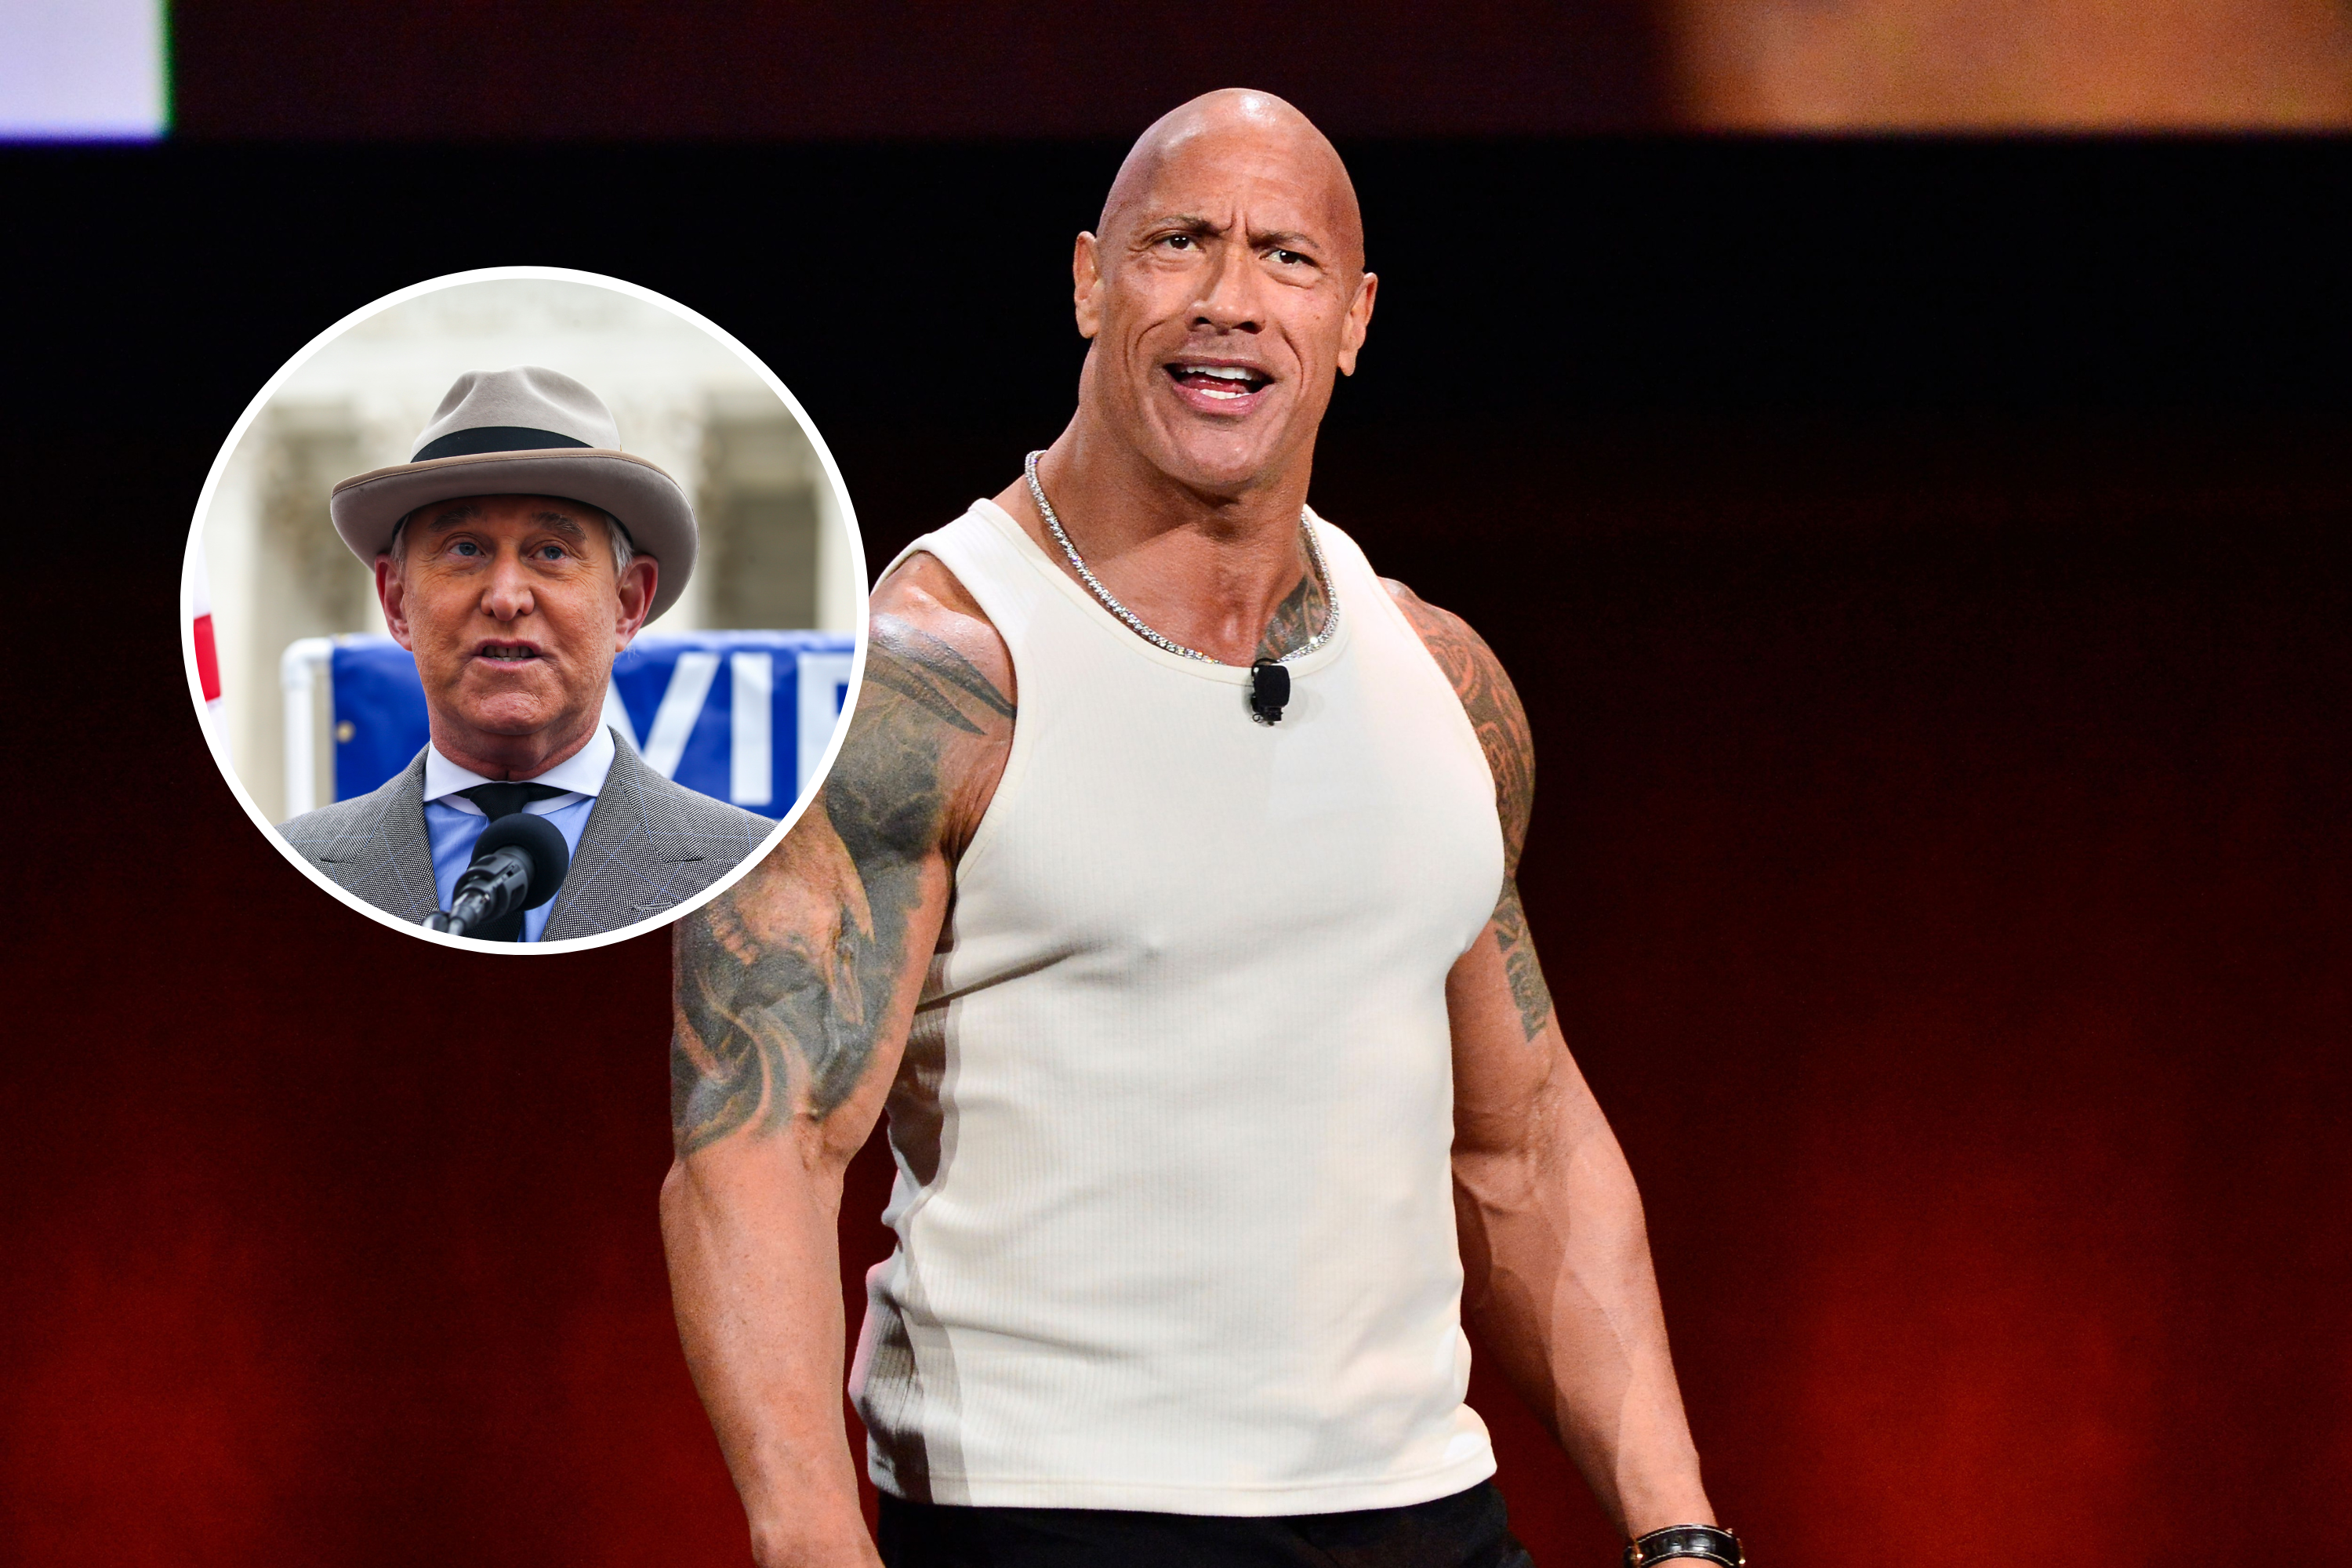 Roger Stone claims he got Dwayne “The Rock” Johnson’s stunt double fired